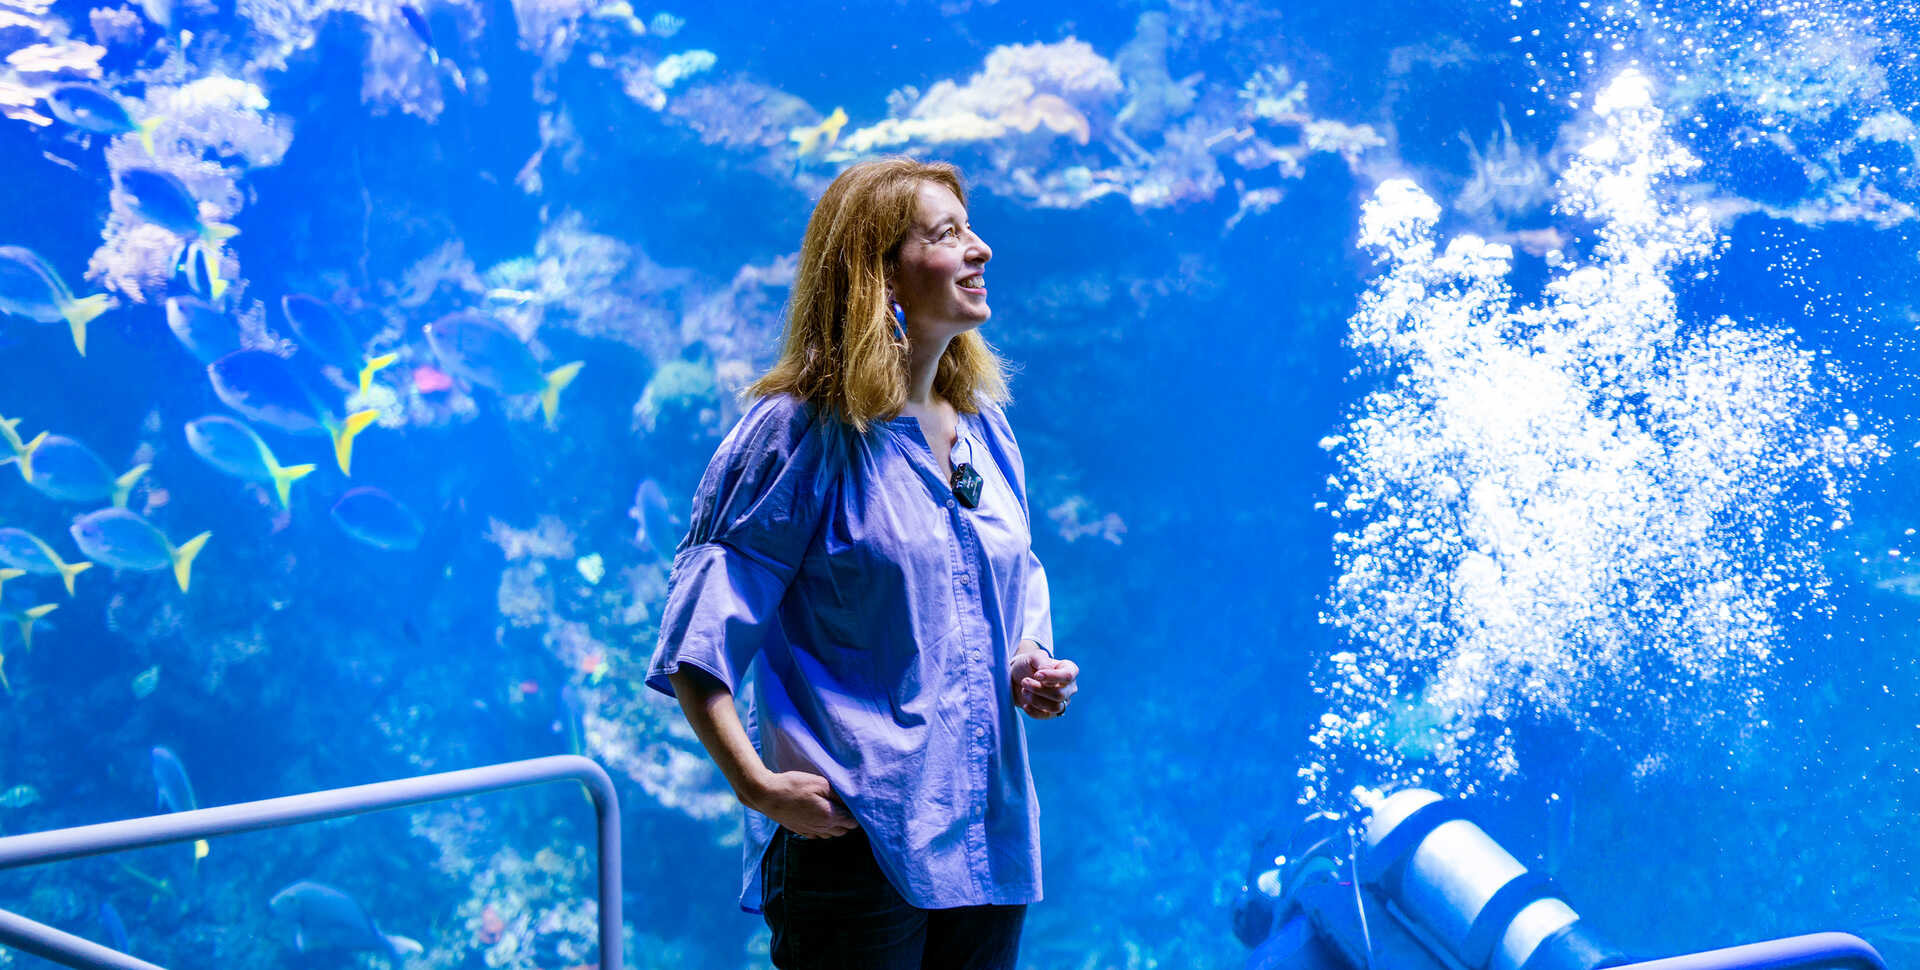 De Young curator Emma Acker view the Philippine Coral Reef exhibit at the Cal Academy. Photo by Nicole Ravicchio